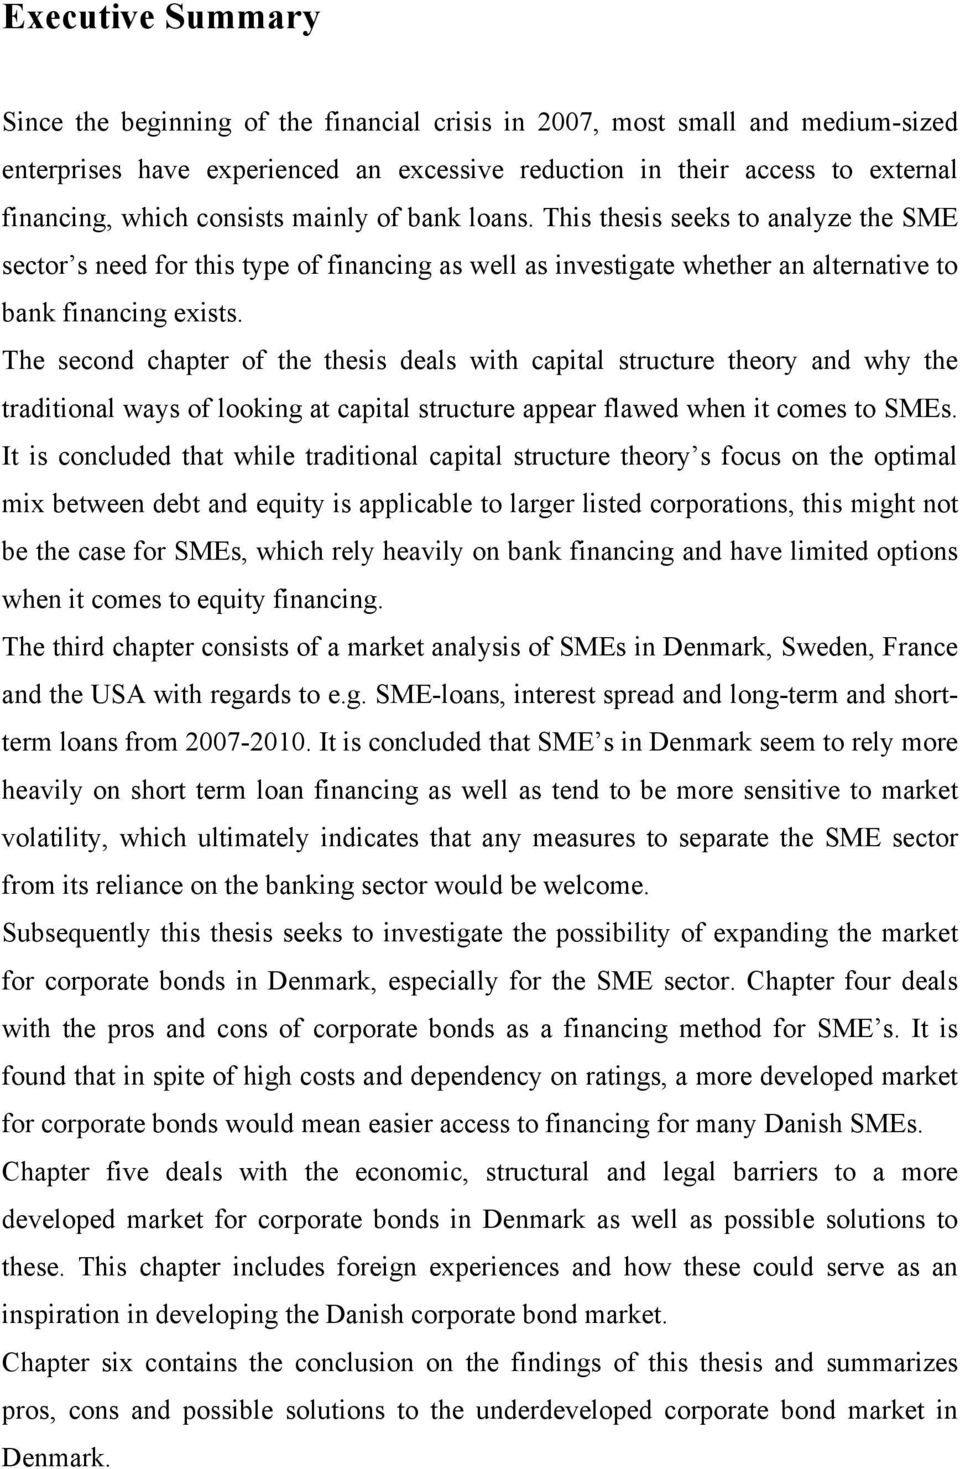 The second chapter of the thesis deals with capital structure theory and why the traditional ways of looking at capital structure appear flawed when it comes to SMEs.